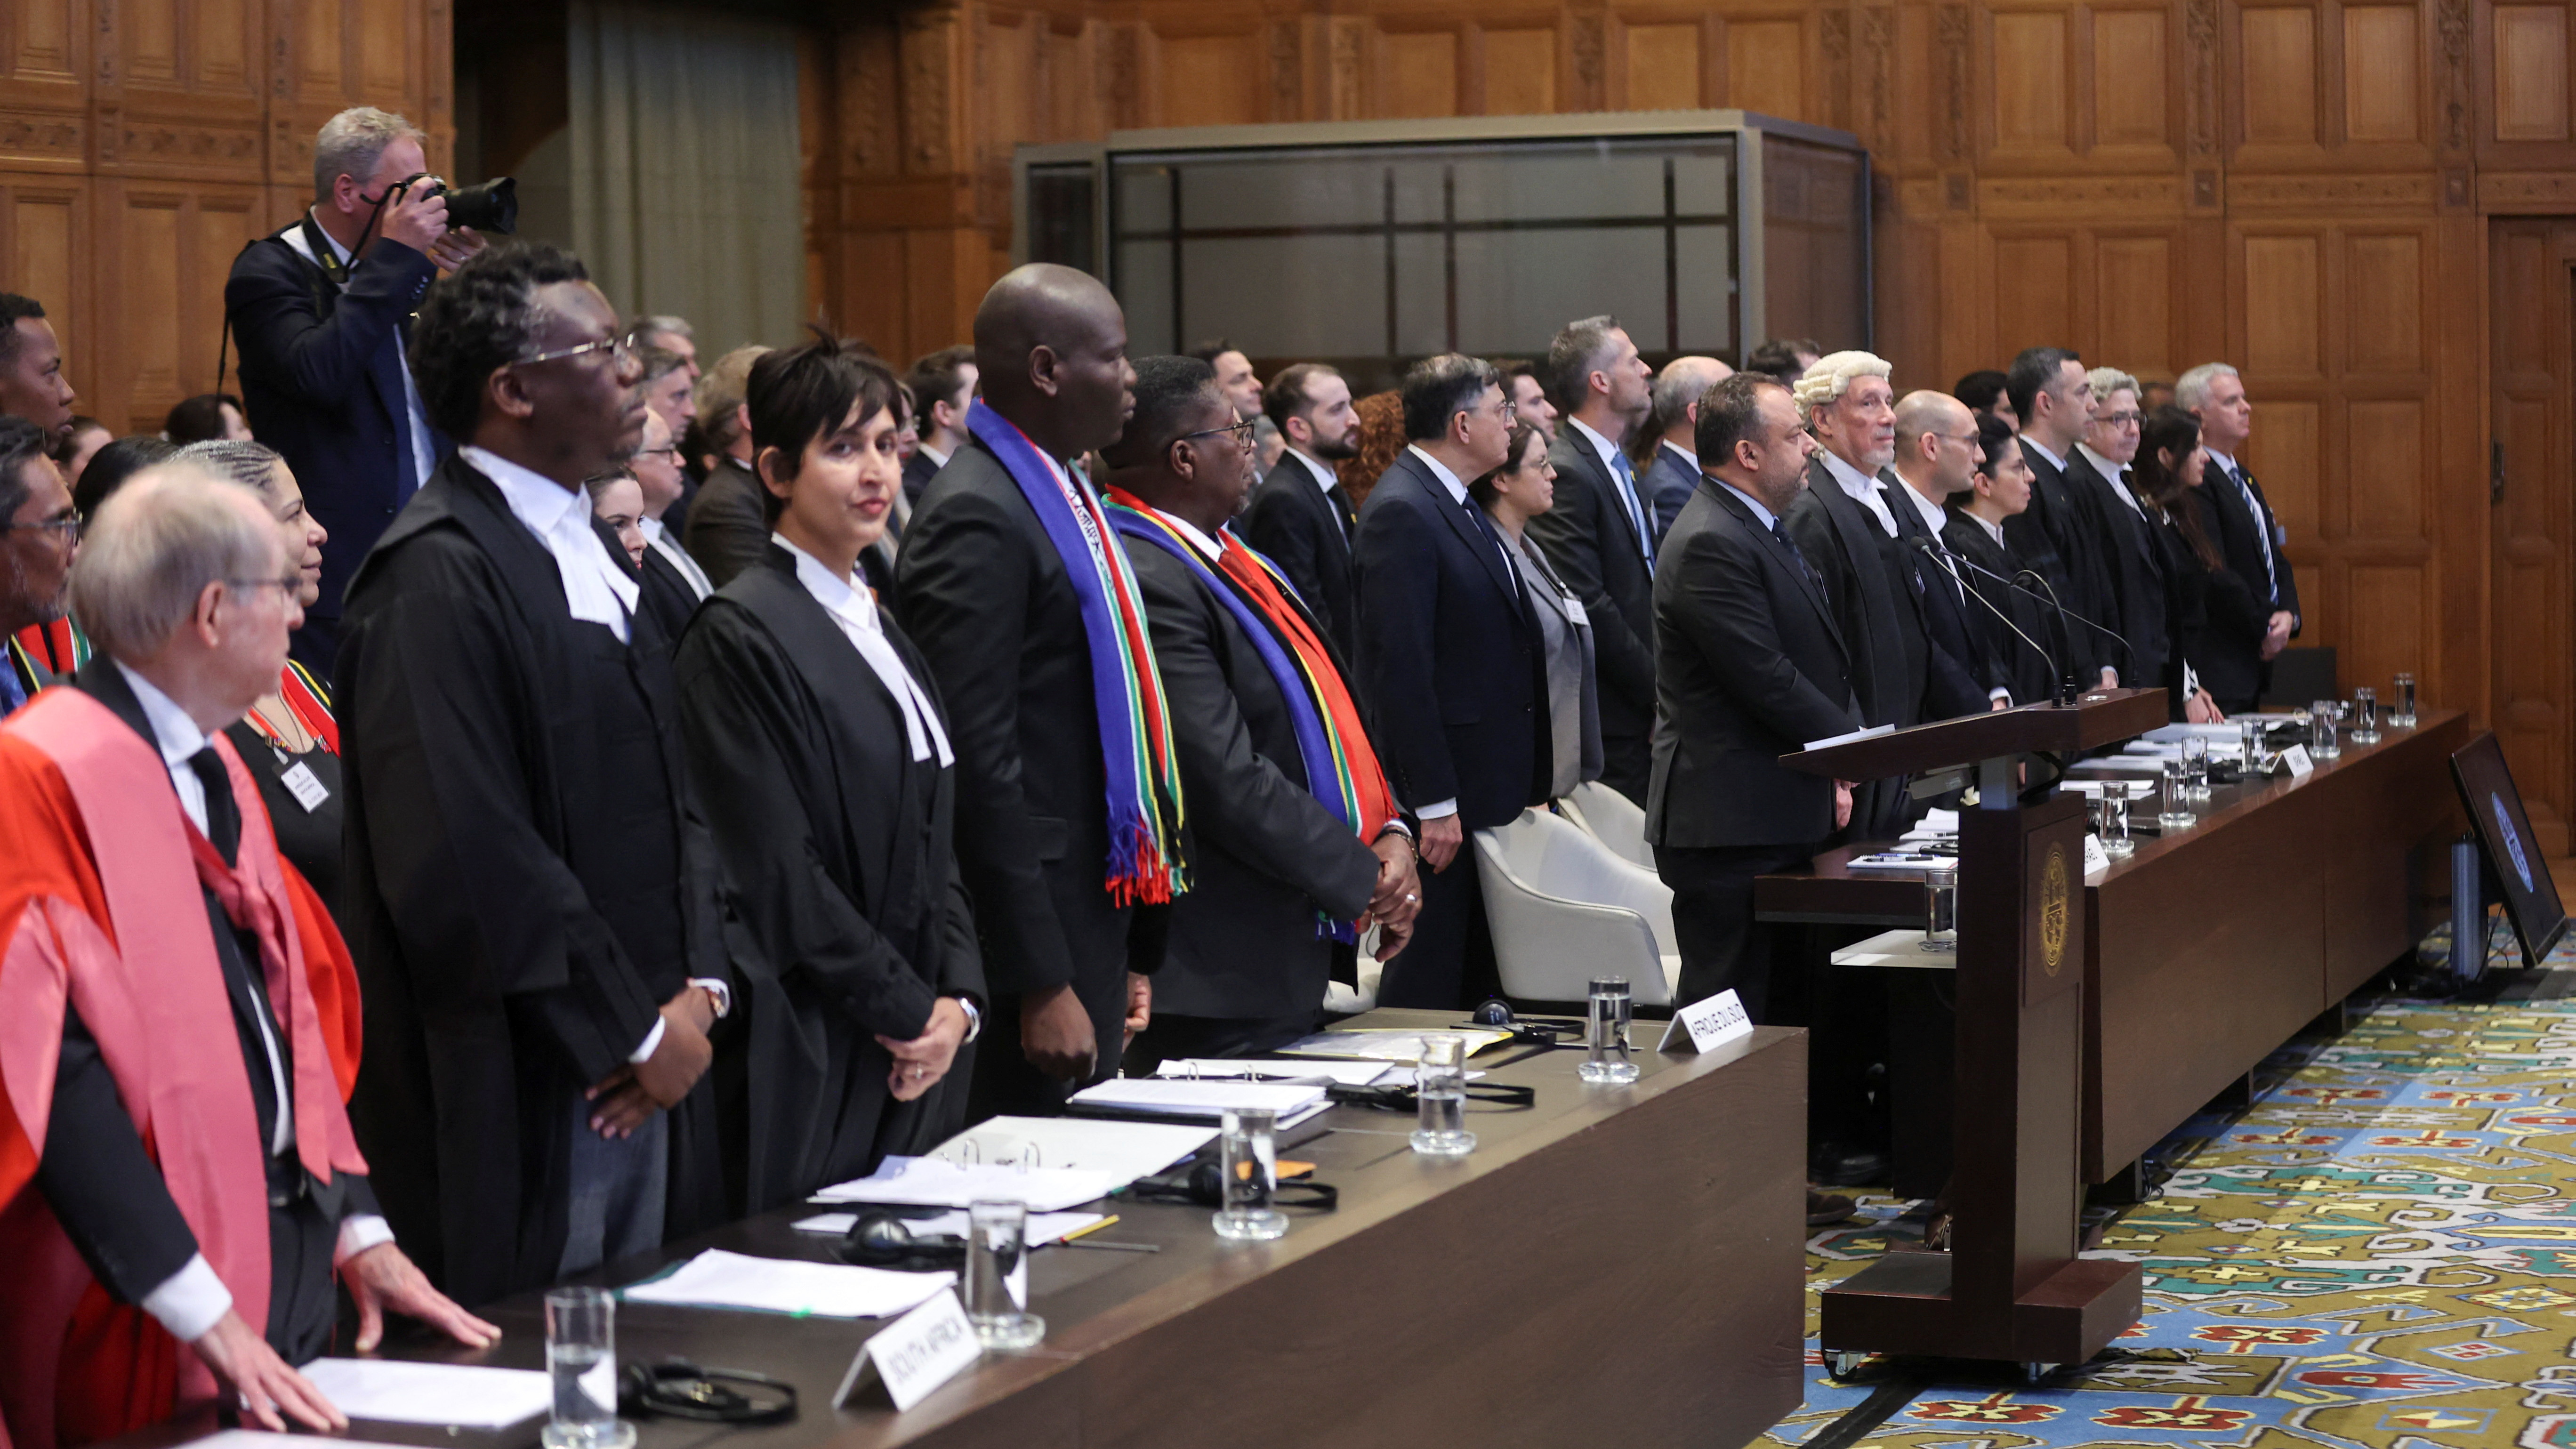 South Africa's Minister of Justice Ronald Lamola, lawyer Adela Hassim and the delegation stand as judges at the International Court of Justice hear a request for emergency measures by South Africa, who asked the court to order Israel to stop its military actions in Gaza. /Thilo Schmuelgen/Reuters